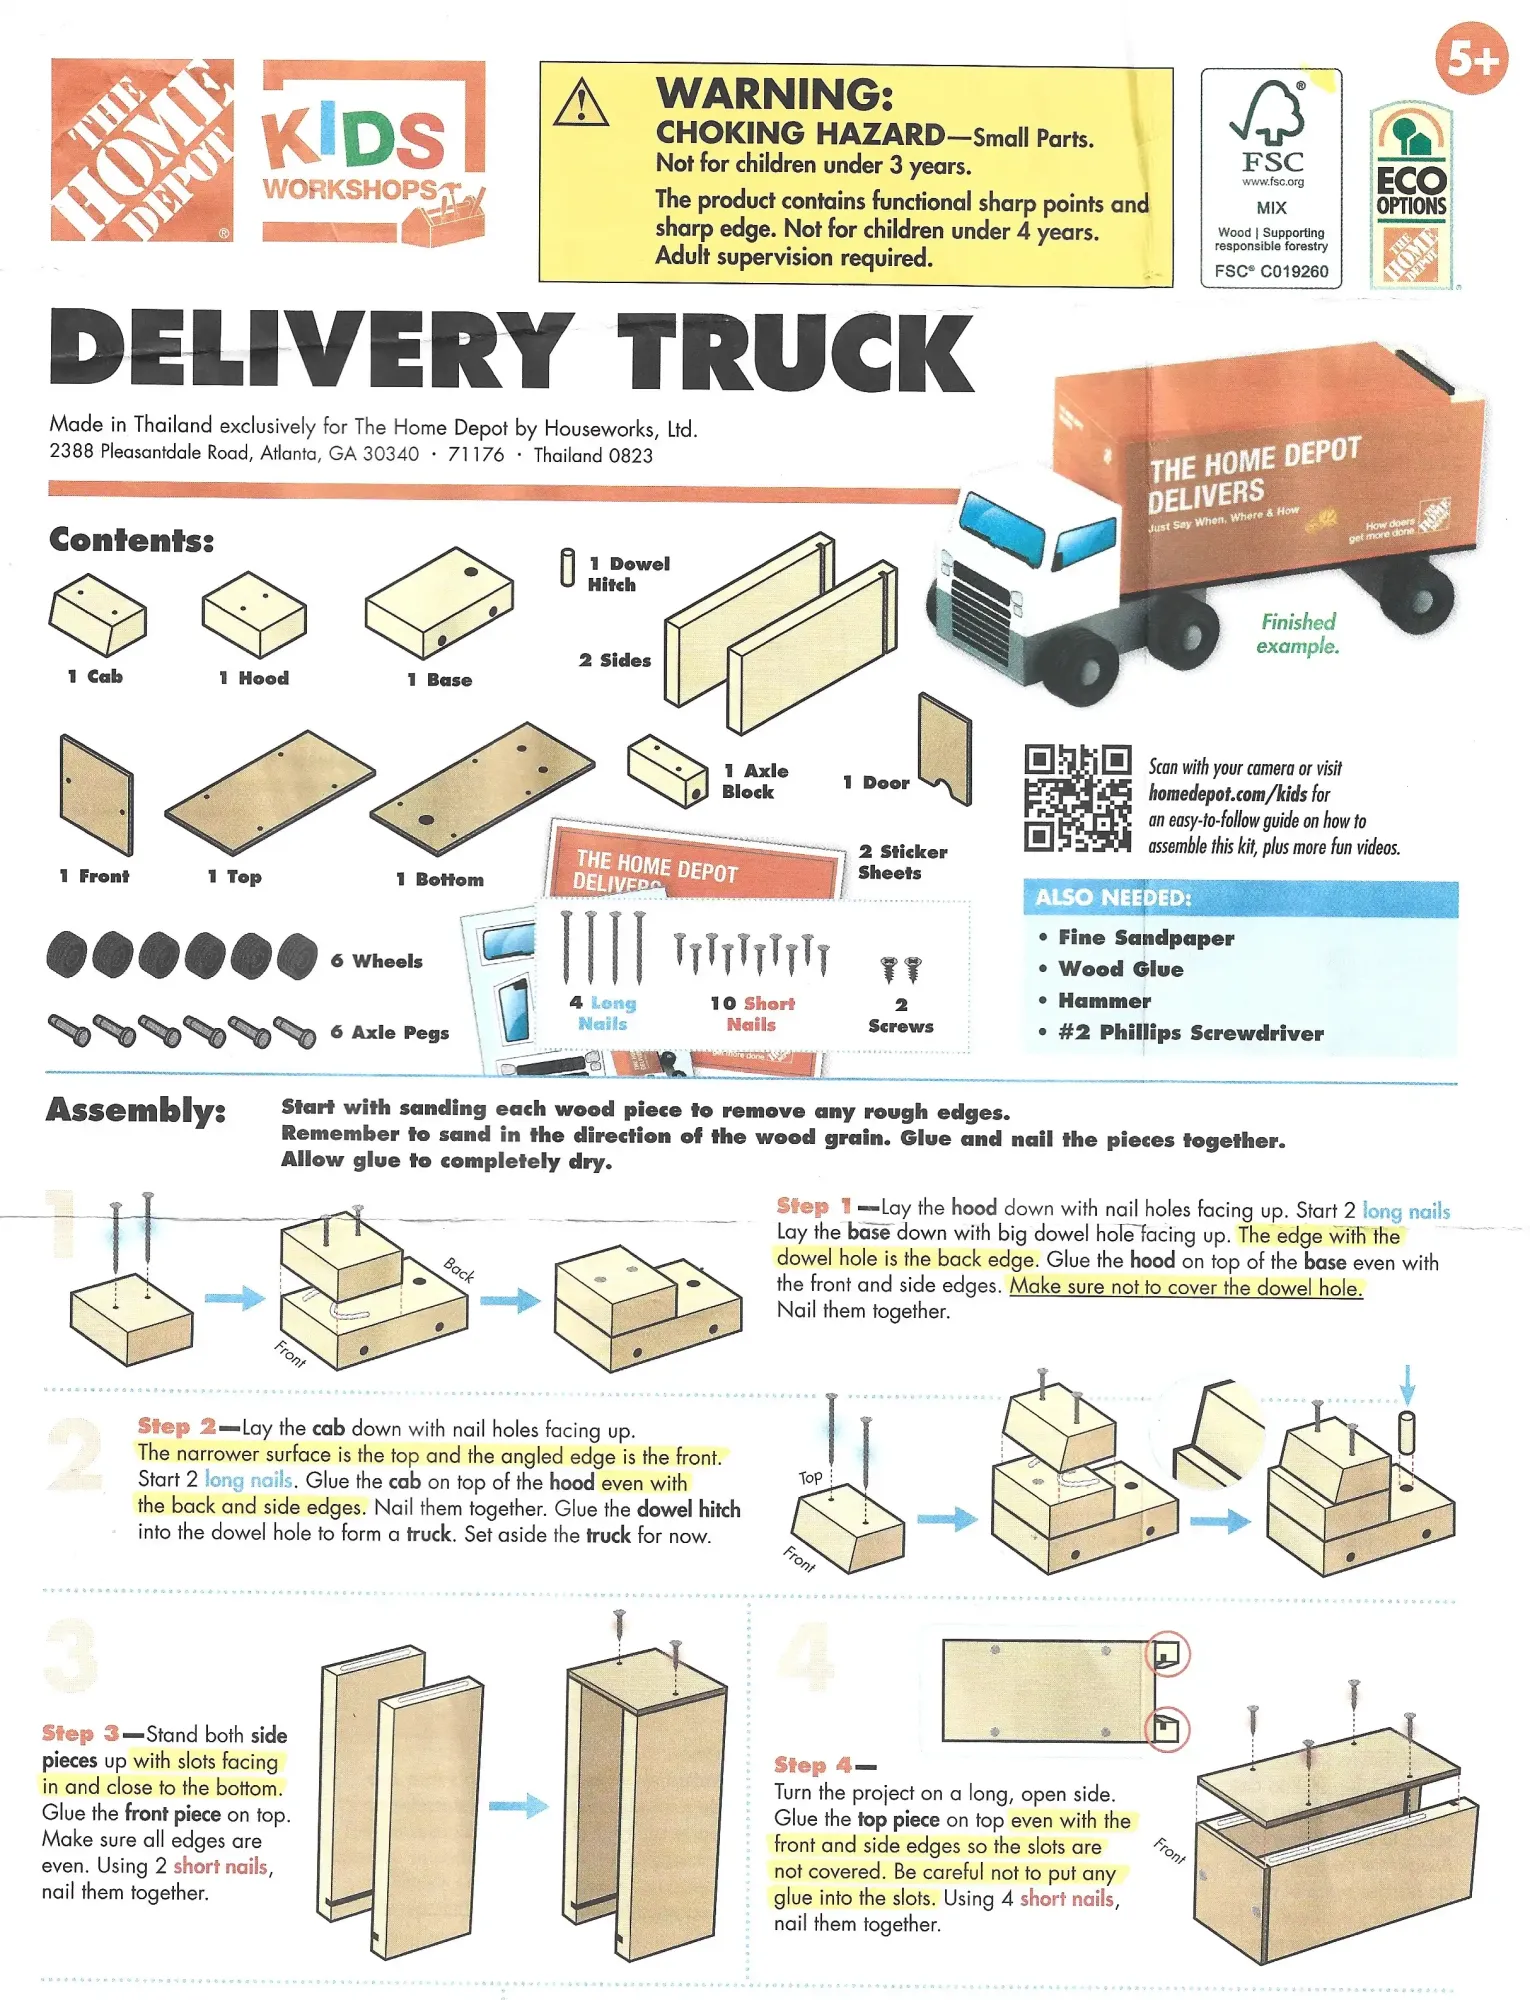 The Home Depot Kids Workshops Delivery Truck Instructions English 1